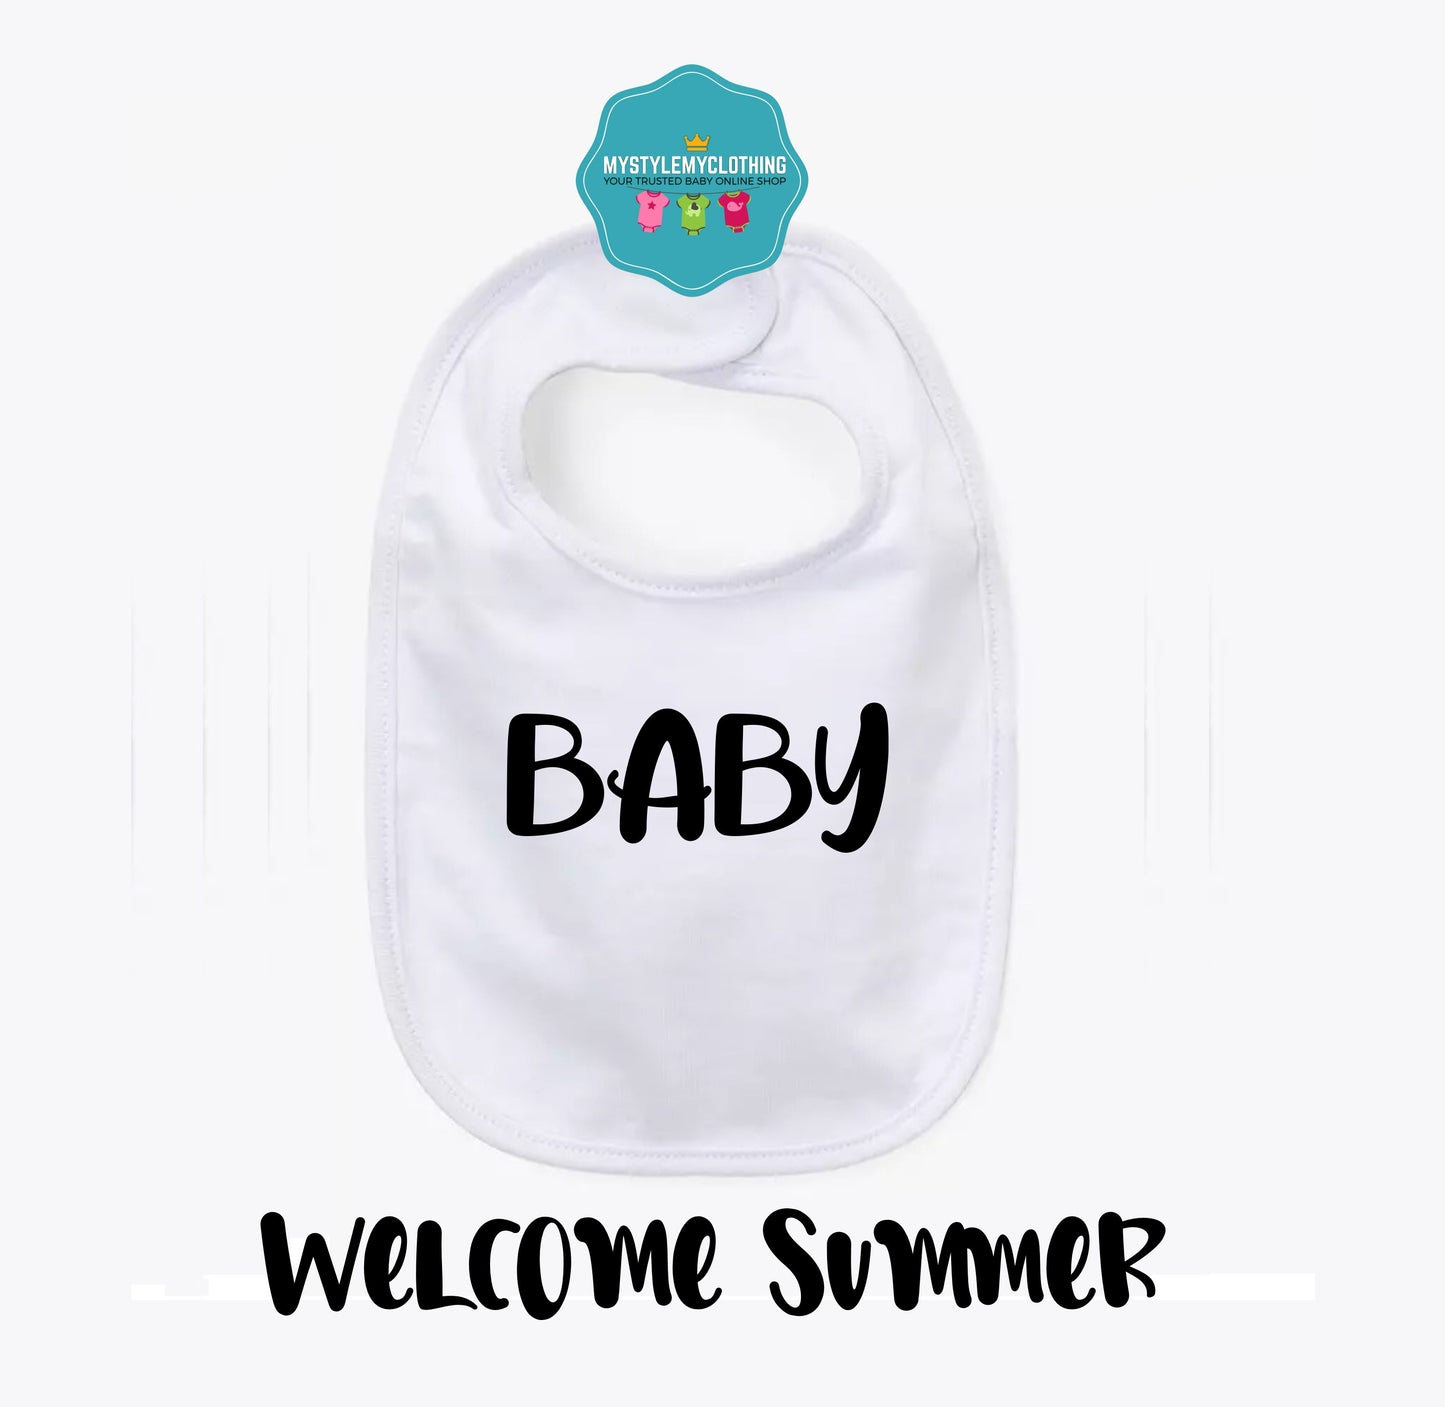 Create Your Own Baby Name Bibs - MYSTYLEMYCLOTHING